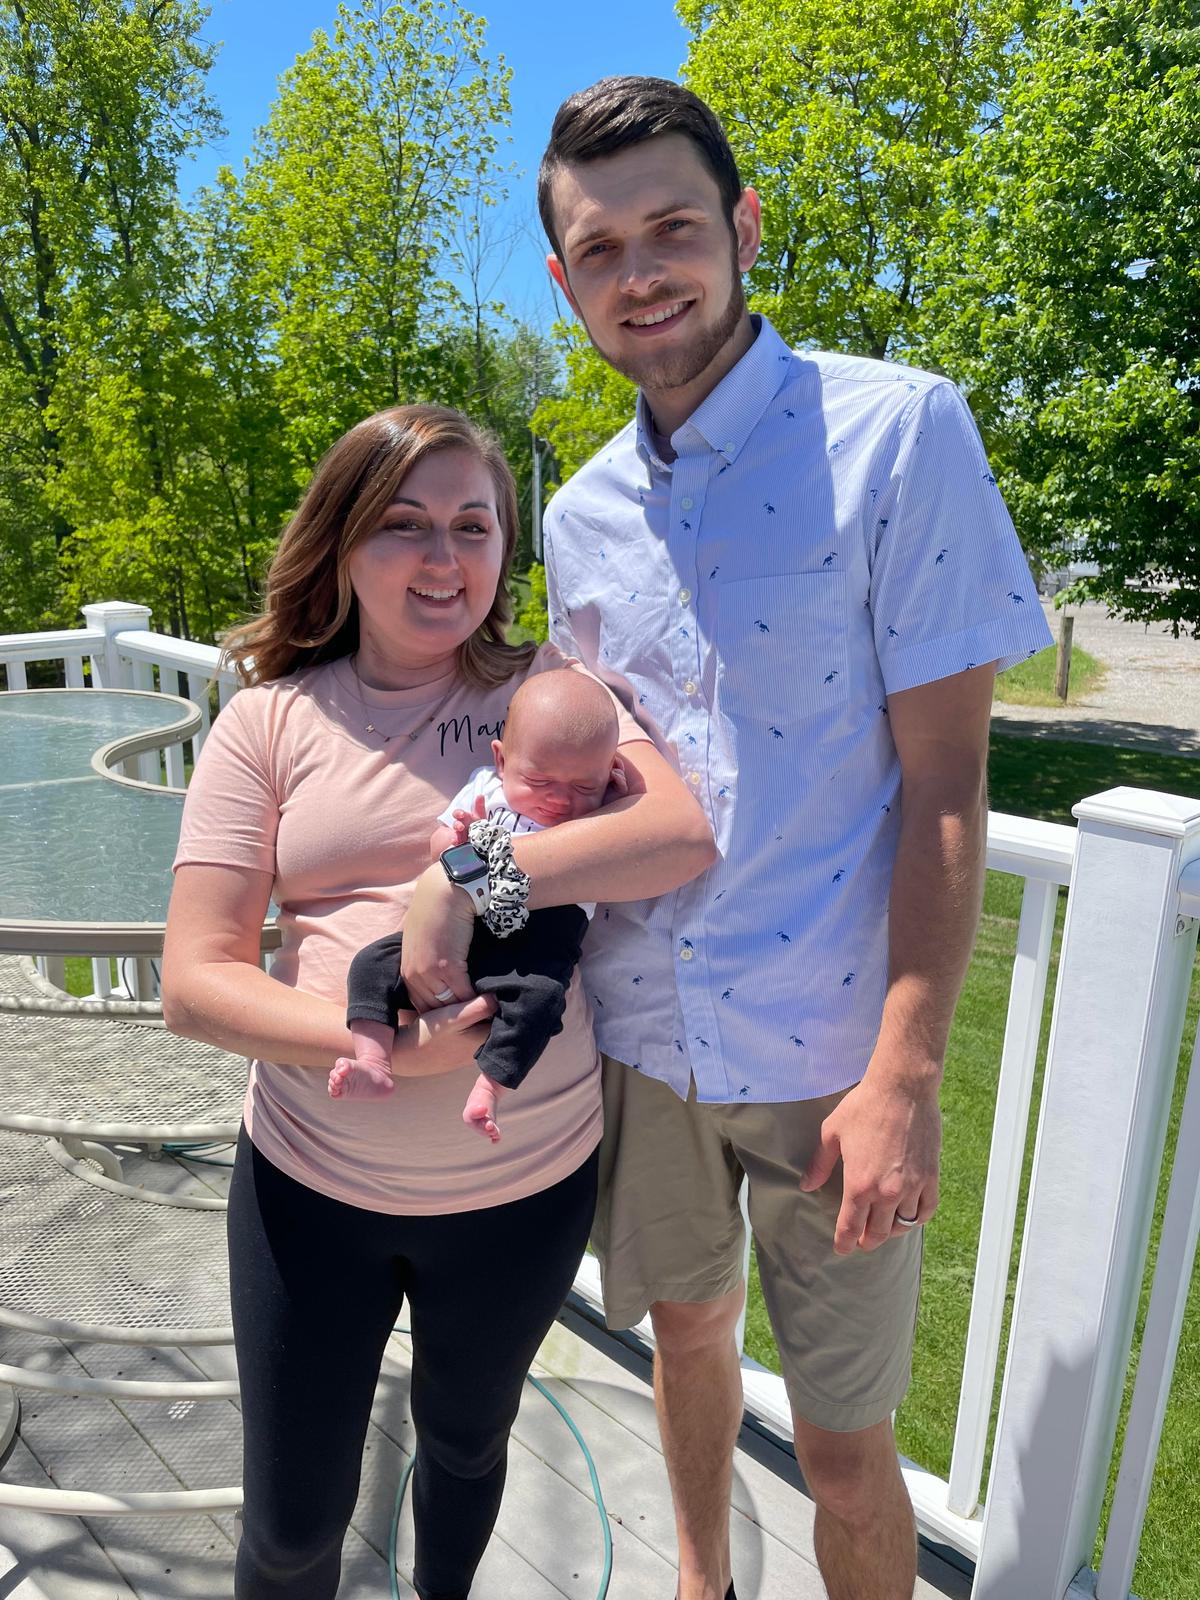 Veronica and Sean with their daughter on Mother's Day. (Courtesy of Veronica Williams)